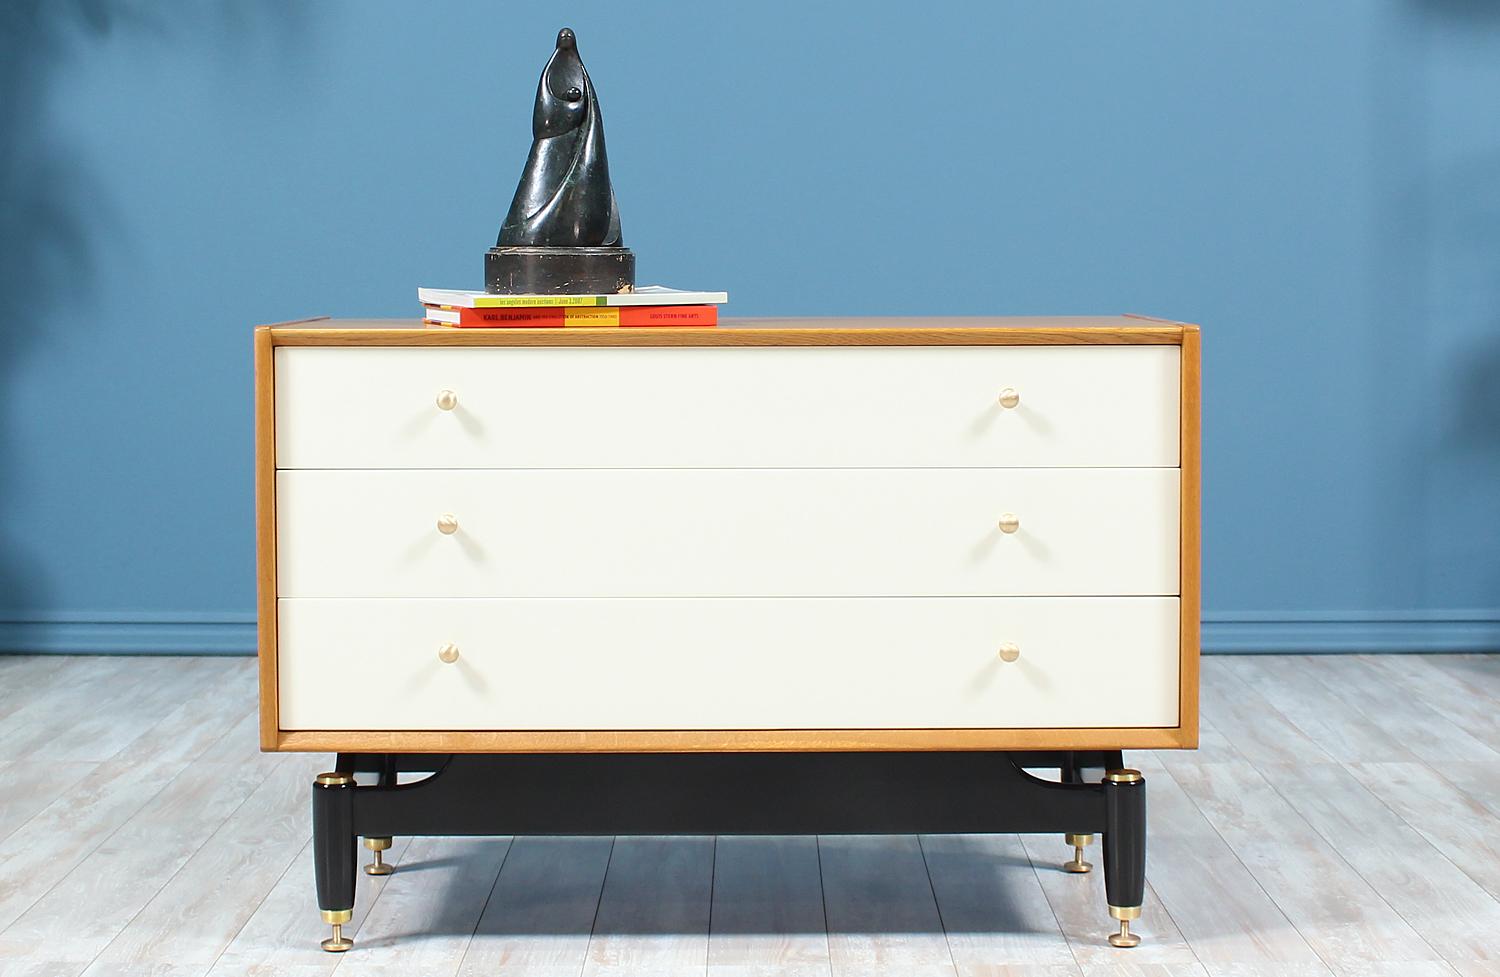 Elegant chest designed by E. Gomme for G-Plan in the United Kingdom circa 1960’s. This beautiful three-drawer chest is crafted in oak wood with complimenting white lacquered drawer fronts and sits on an ebonized wood base with brass feet that match